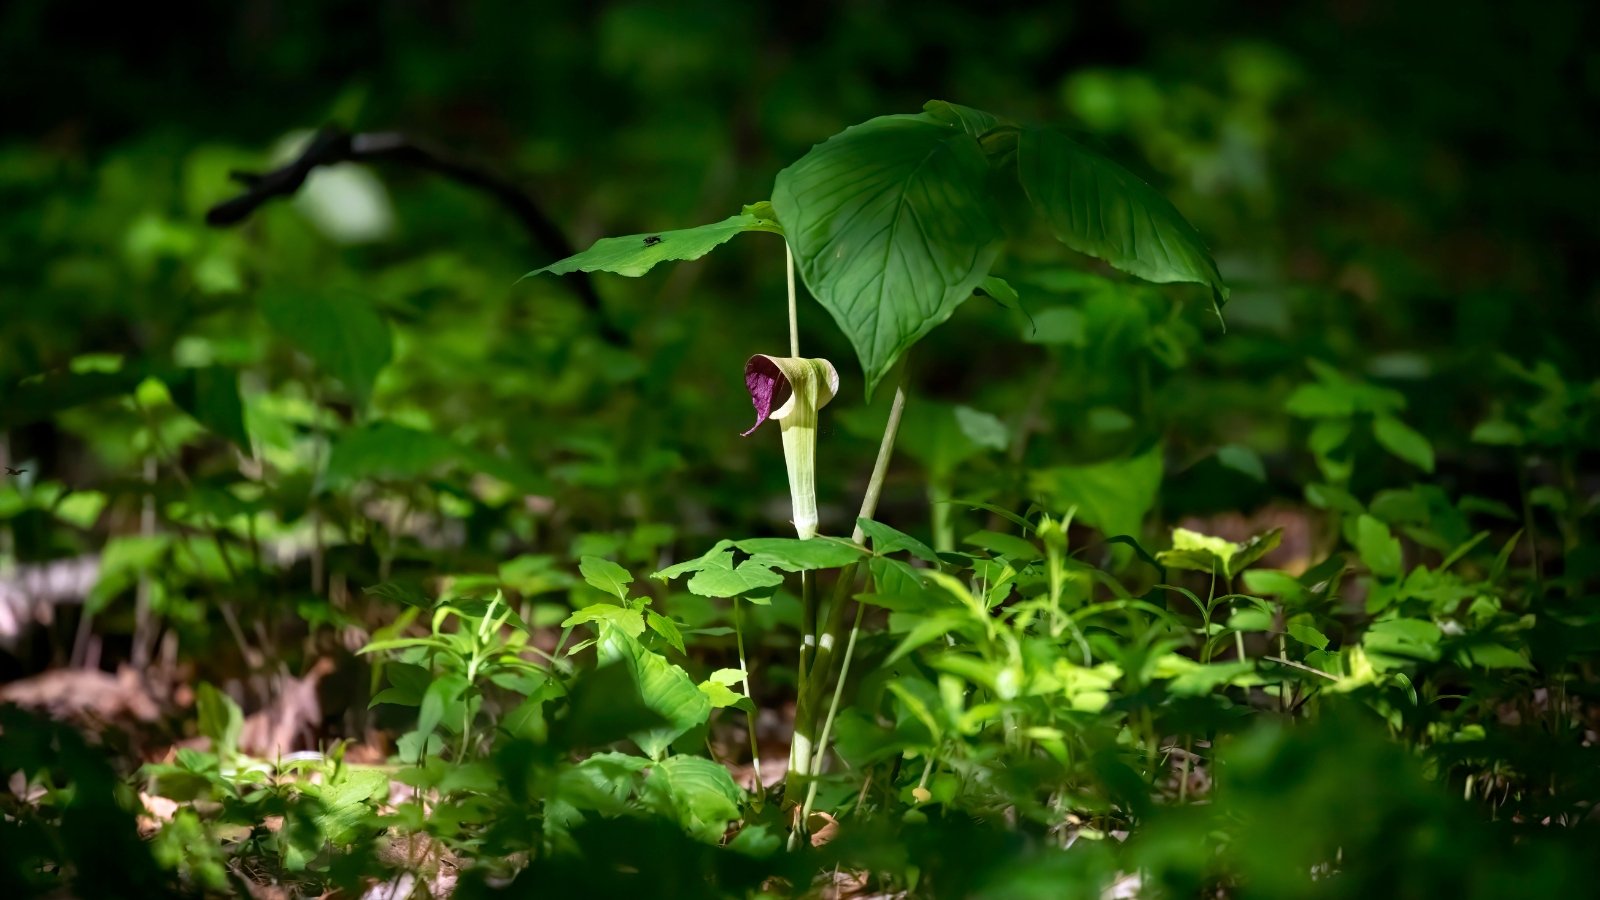 Featuring a tubular spathe that arches protectively over a spadix, the jack-in-the-pulpit is framed by glossy, three-parted leaves in a shady garden among young plants.